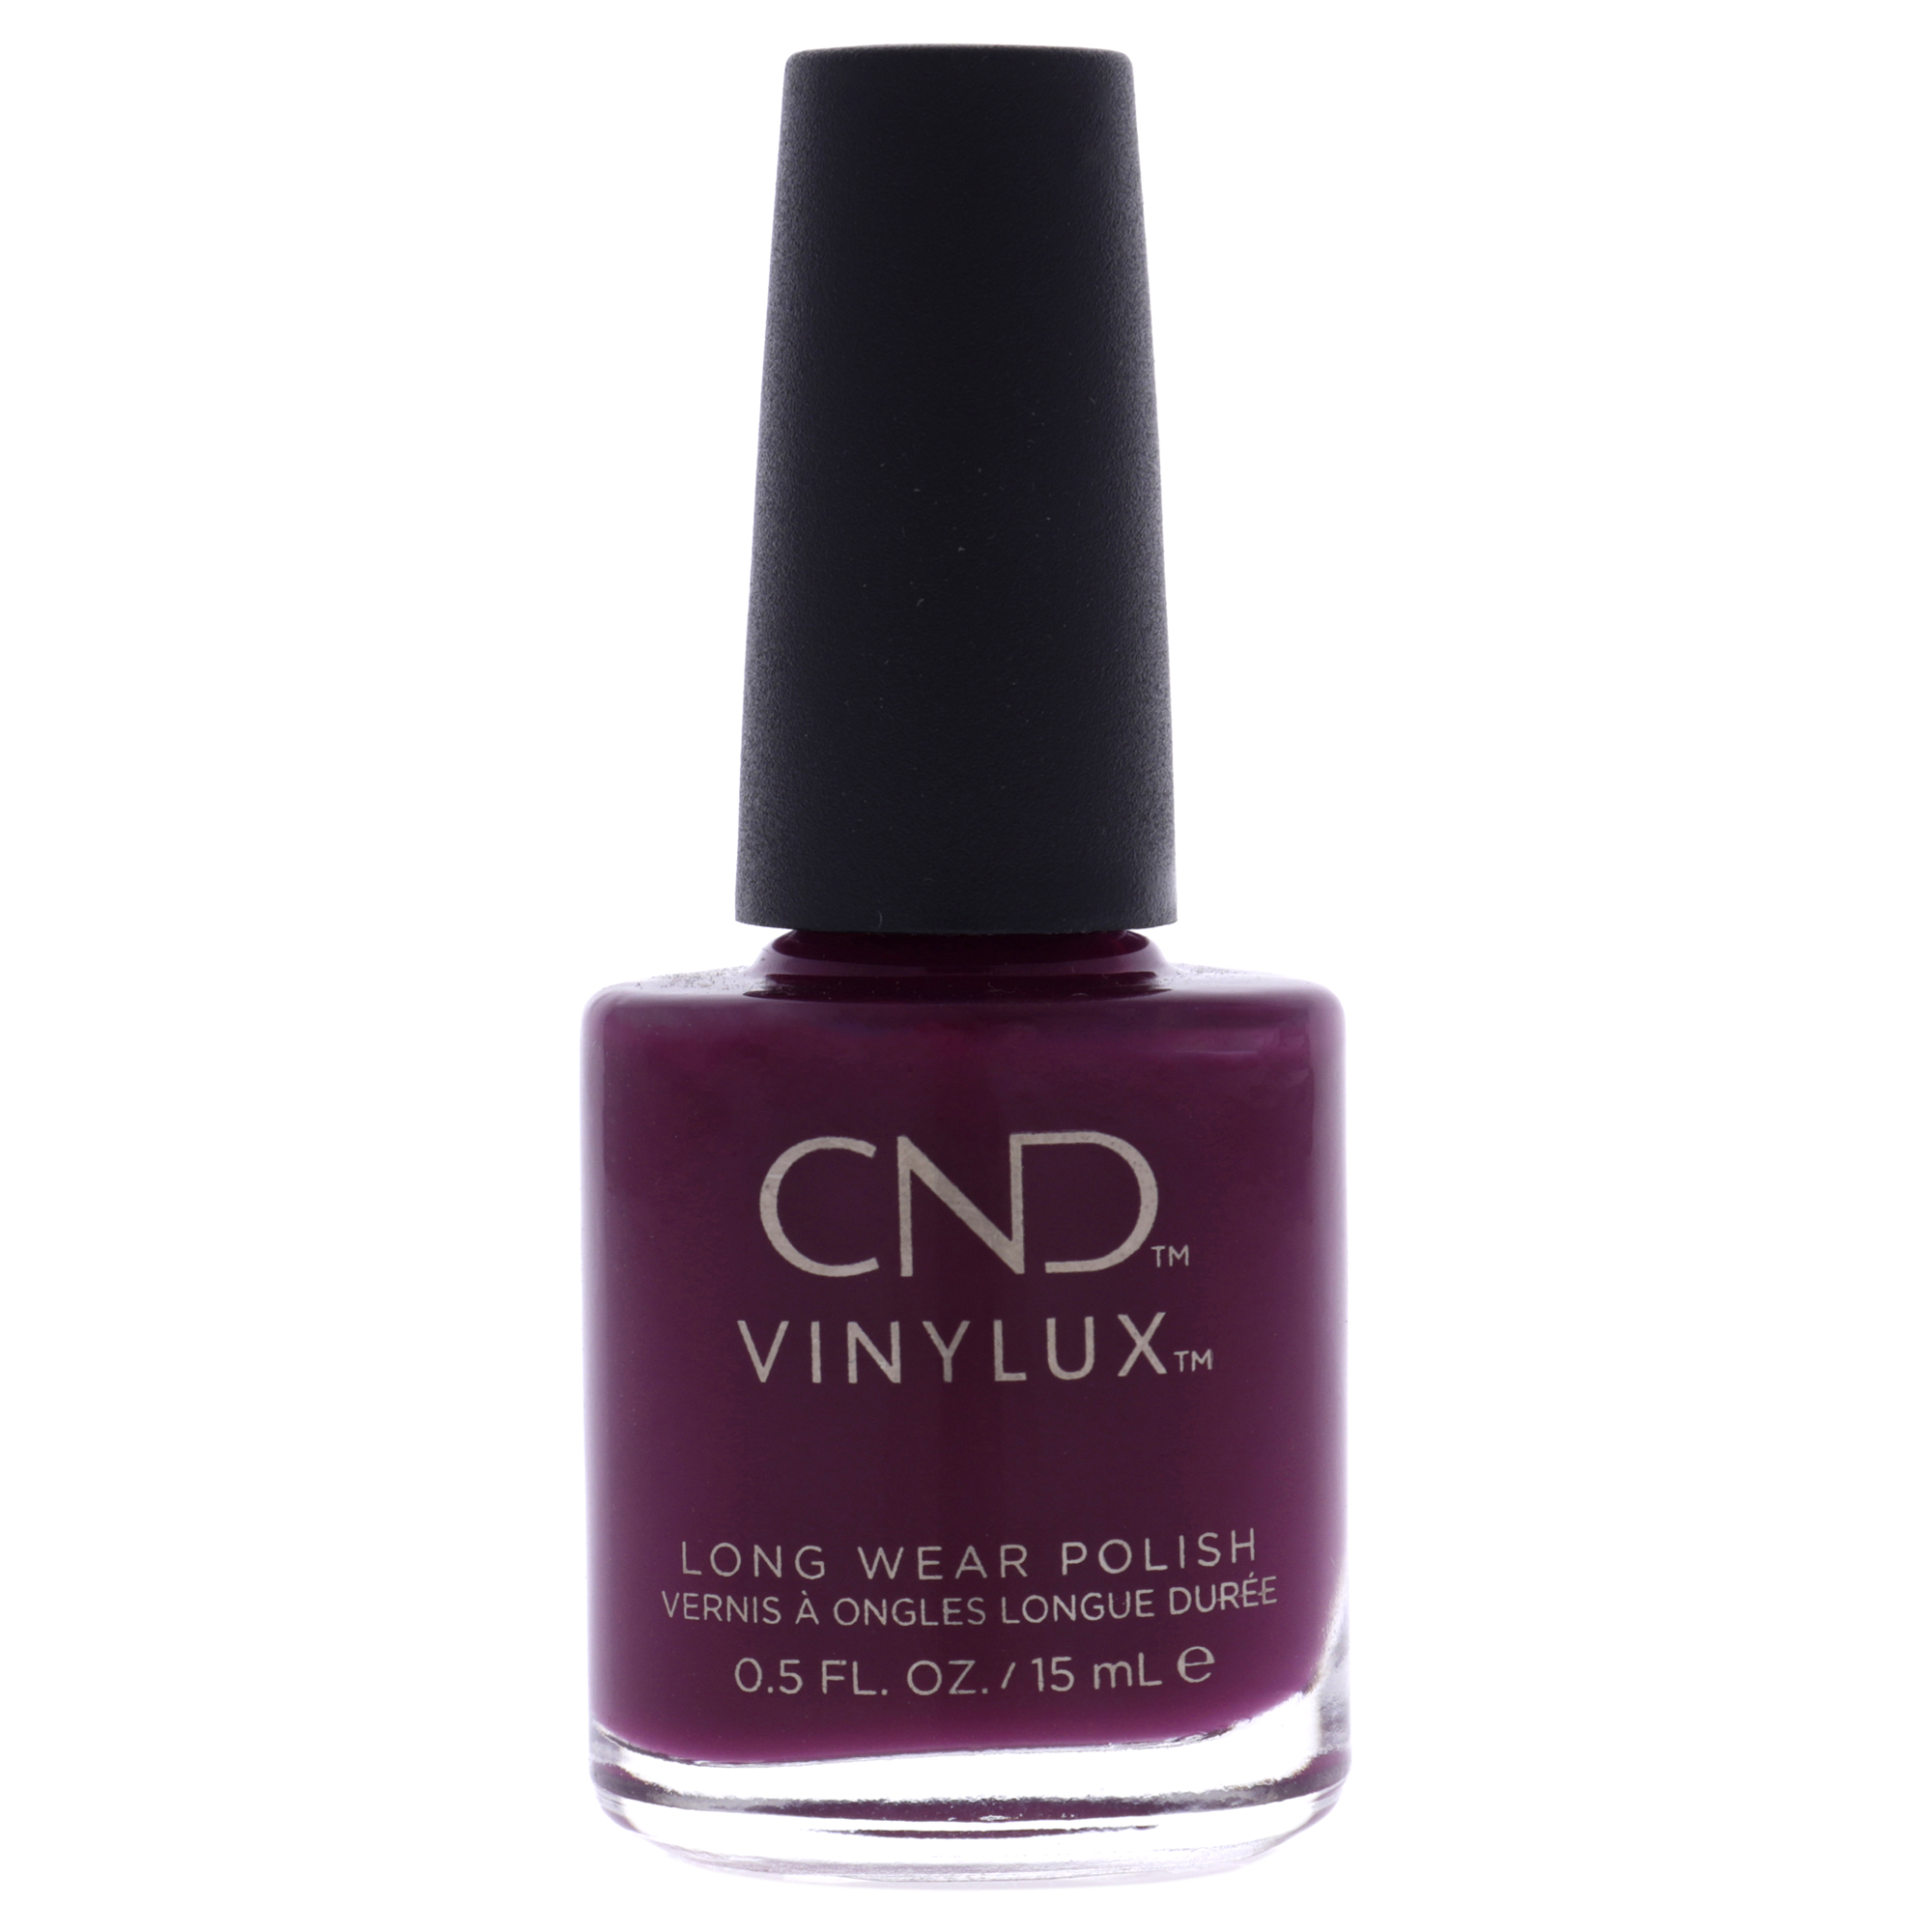 CND Vinylux Weekly Polish - # 153 Tinted Love by CND for Women - 0.5 oz Nail Polish